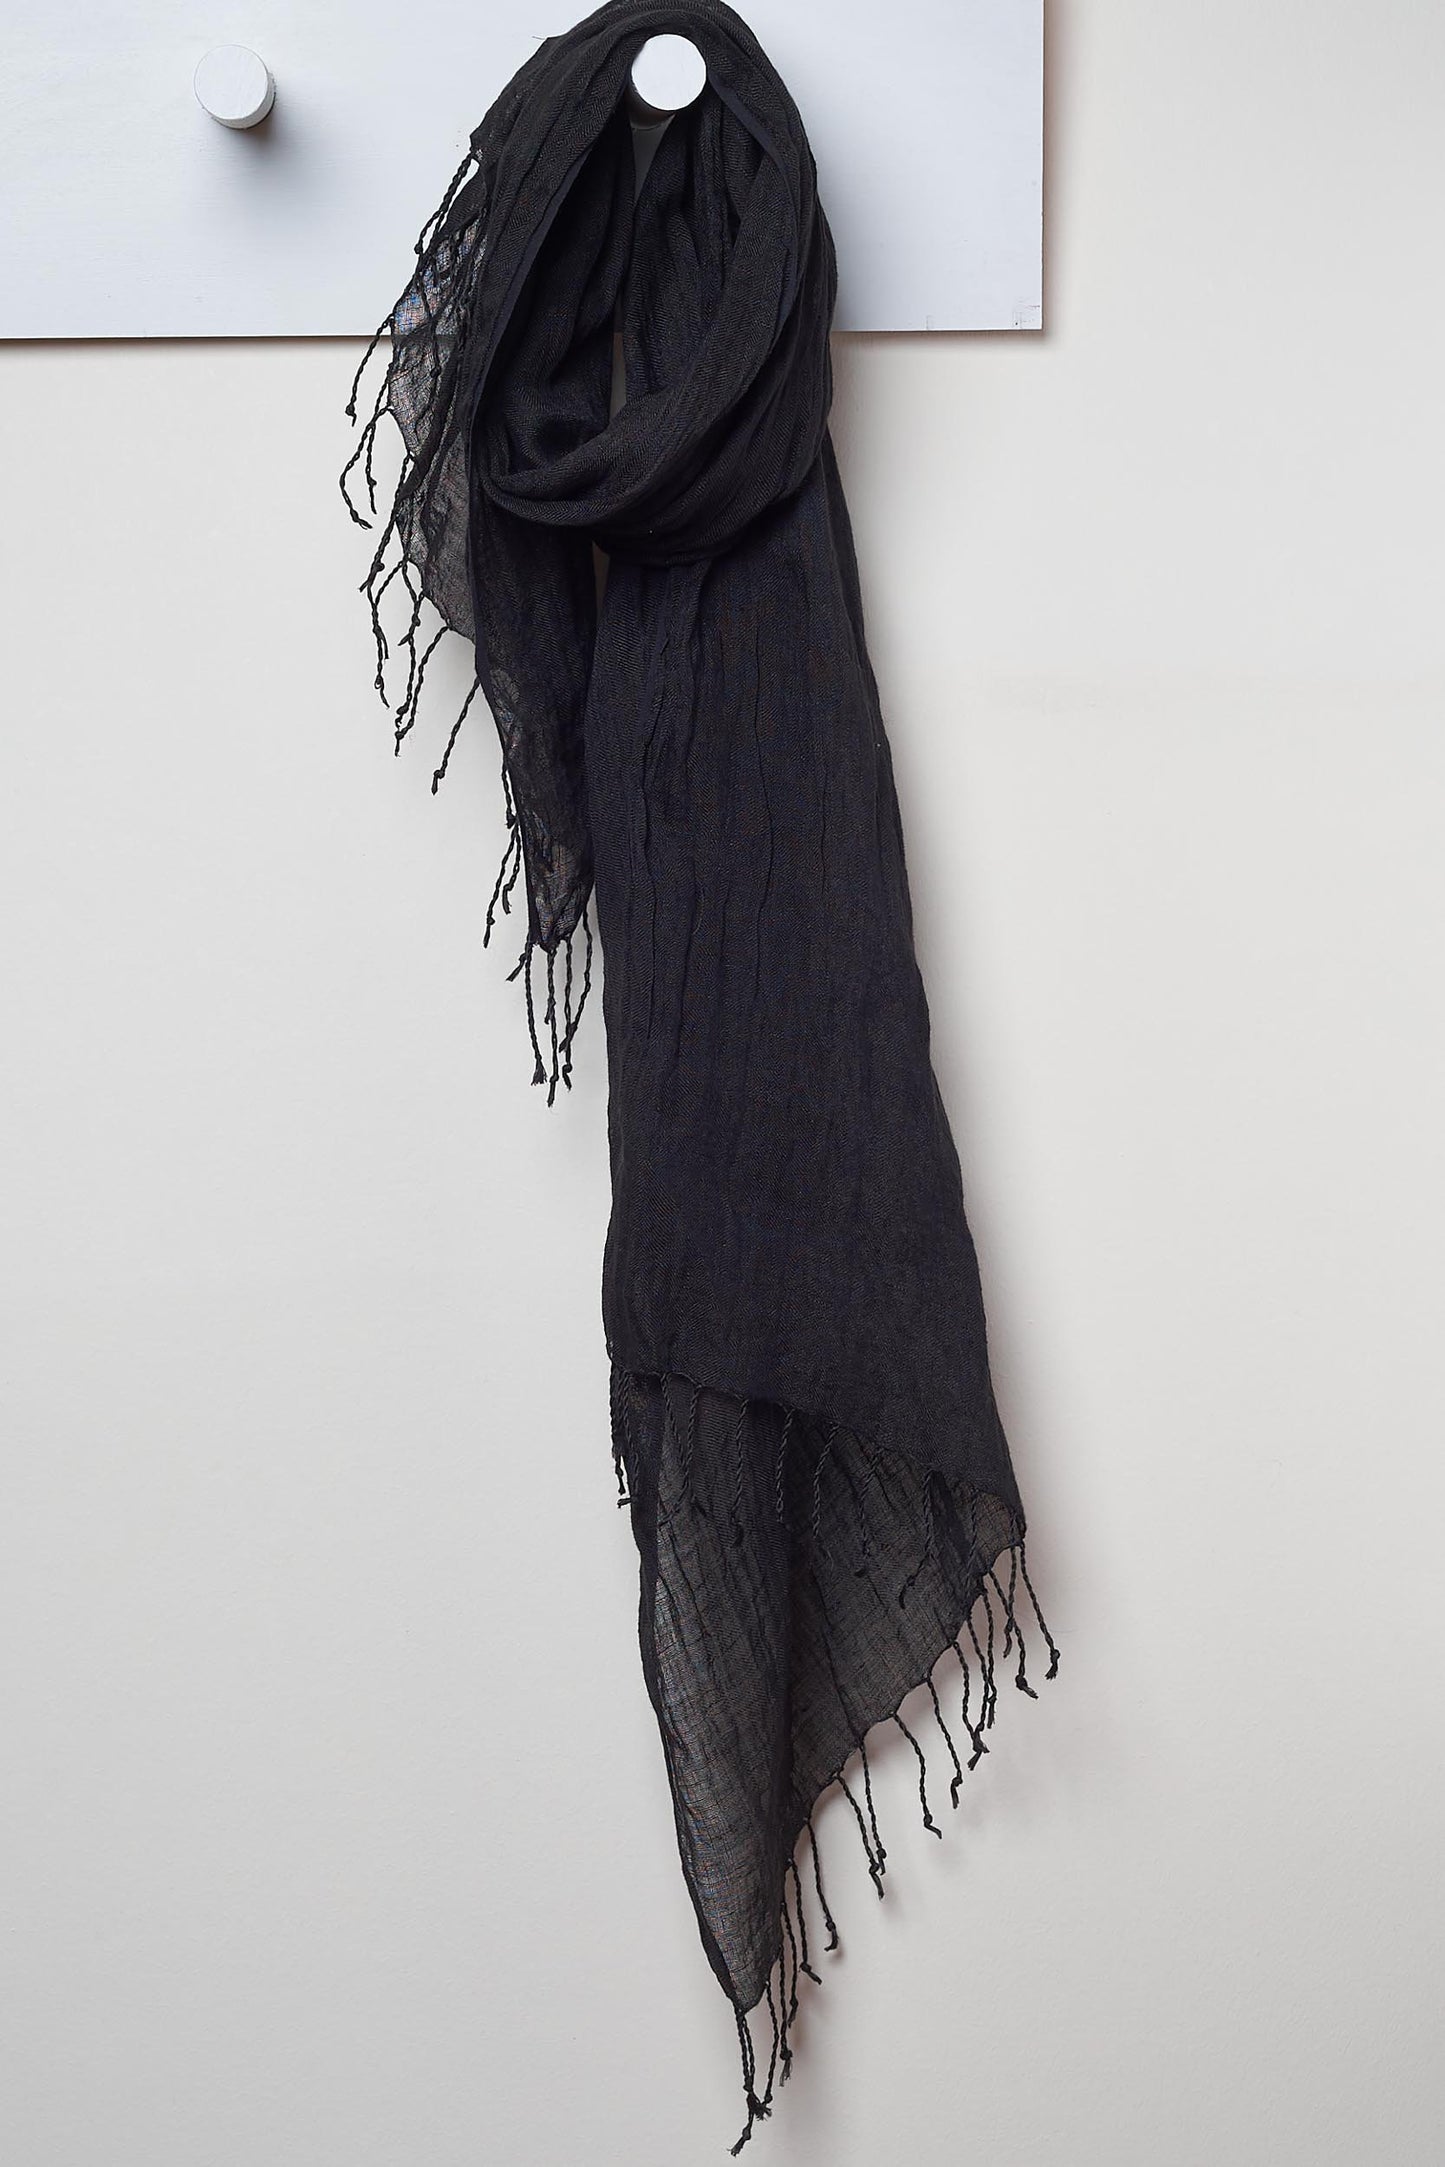 black 3 visits to cairo linen scarf.  looped around a hook detailing the linen texture and thin tassels tied at the short edges of the scarf.